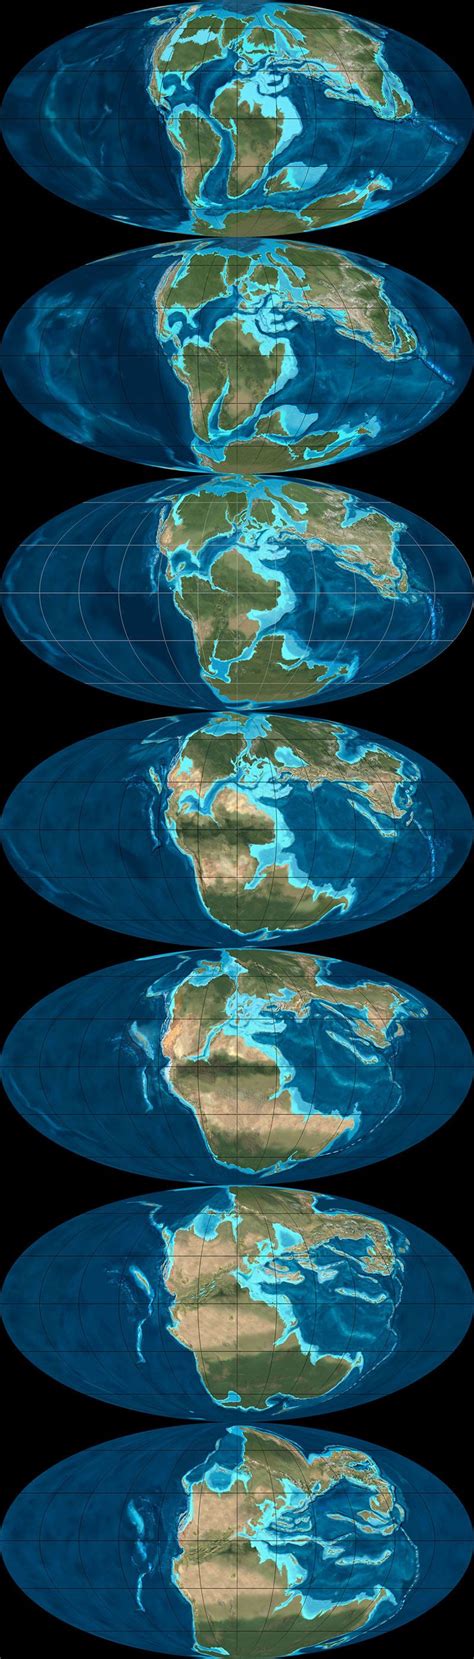 Paleo Tectonic Maps By Ron Blakey From Top To Bottom 105 To 240